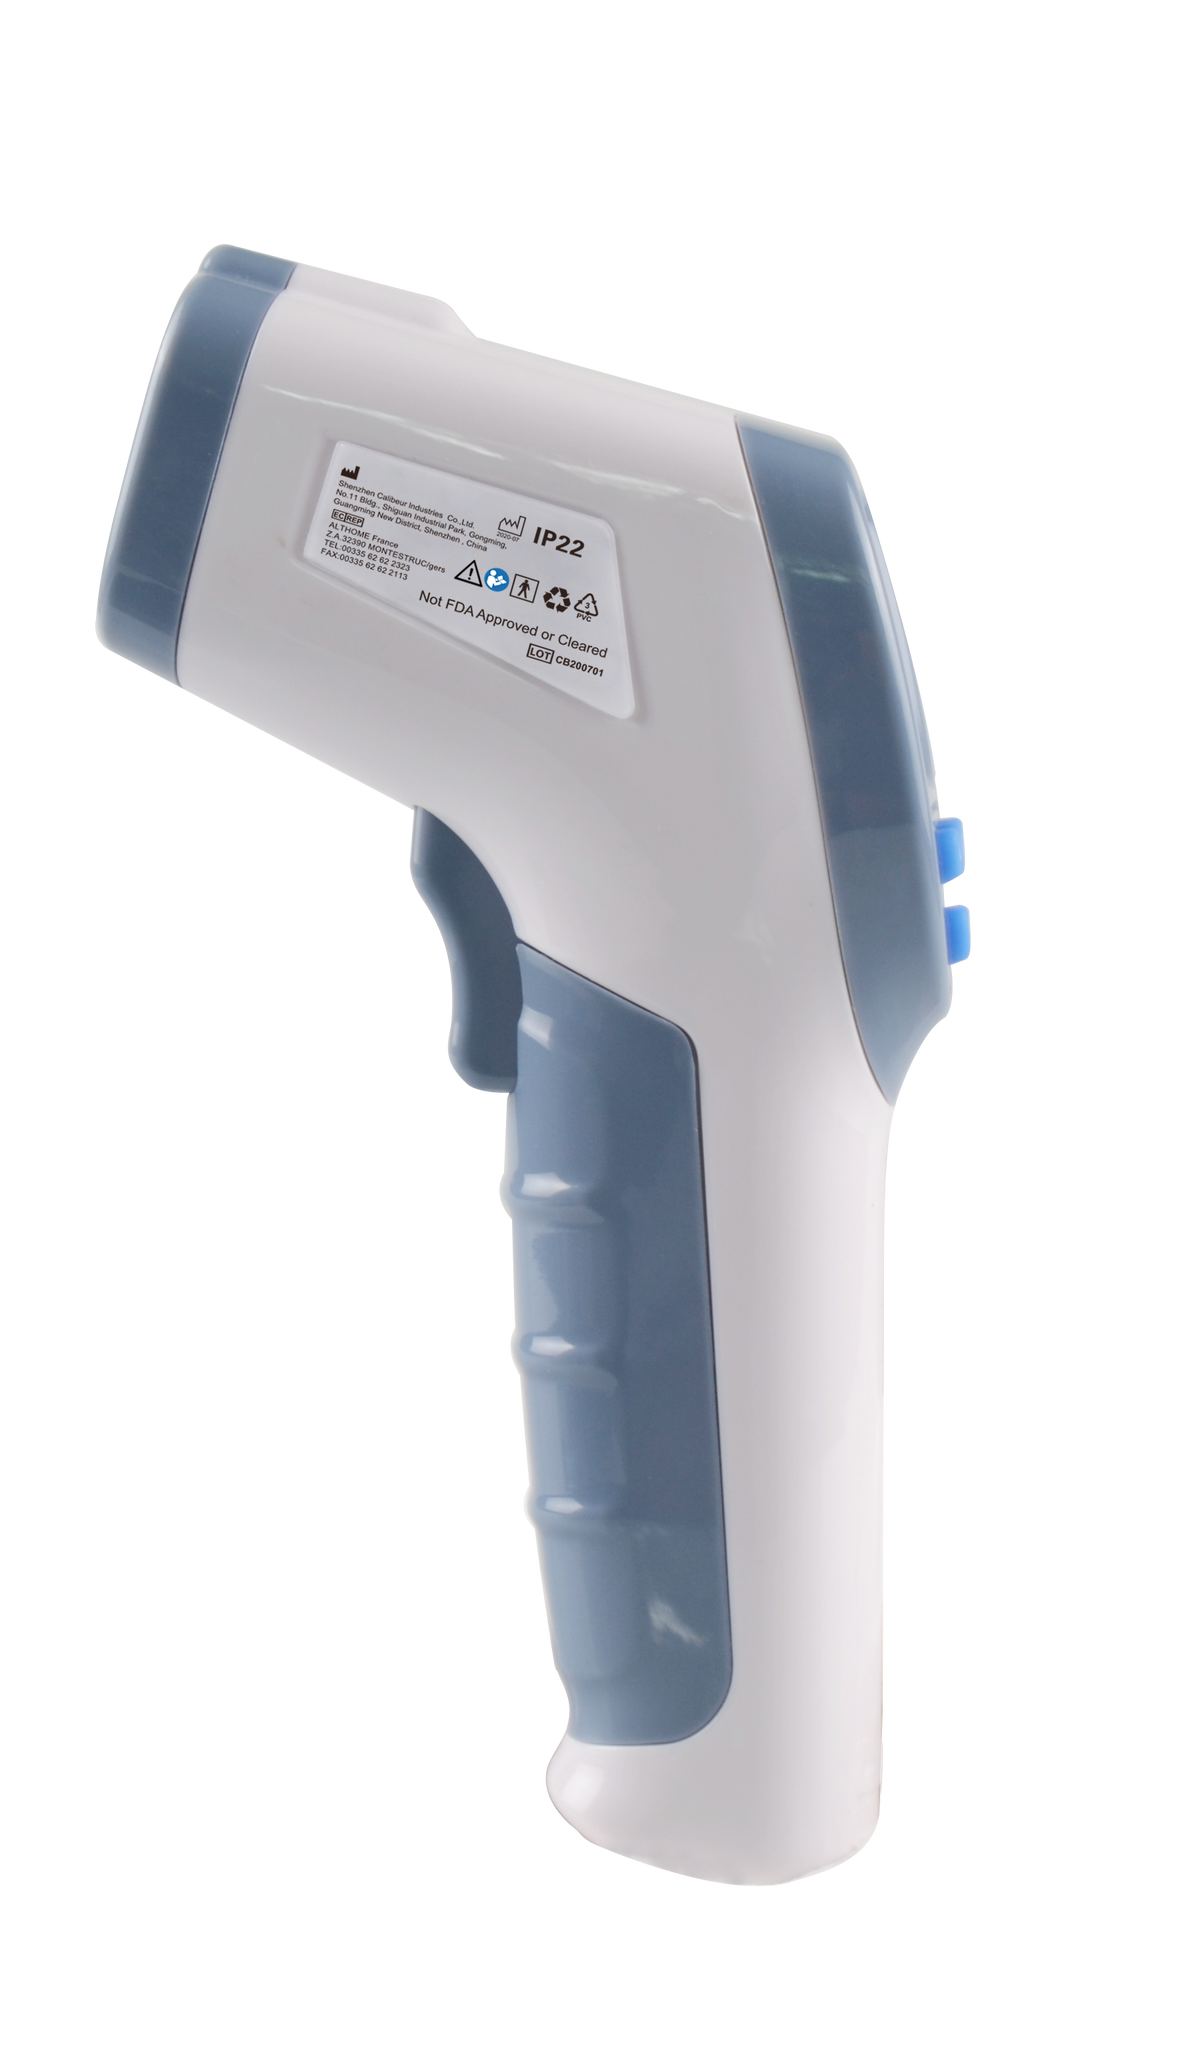 Jumper Non Contact Infrared Thermometer (Spectrum), Dental Product